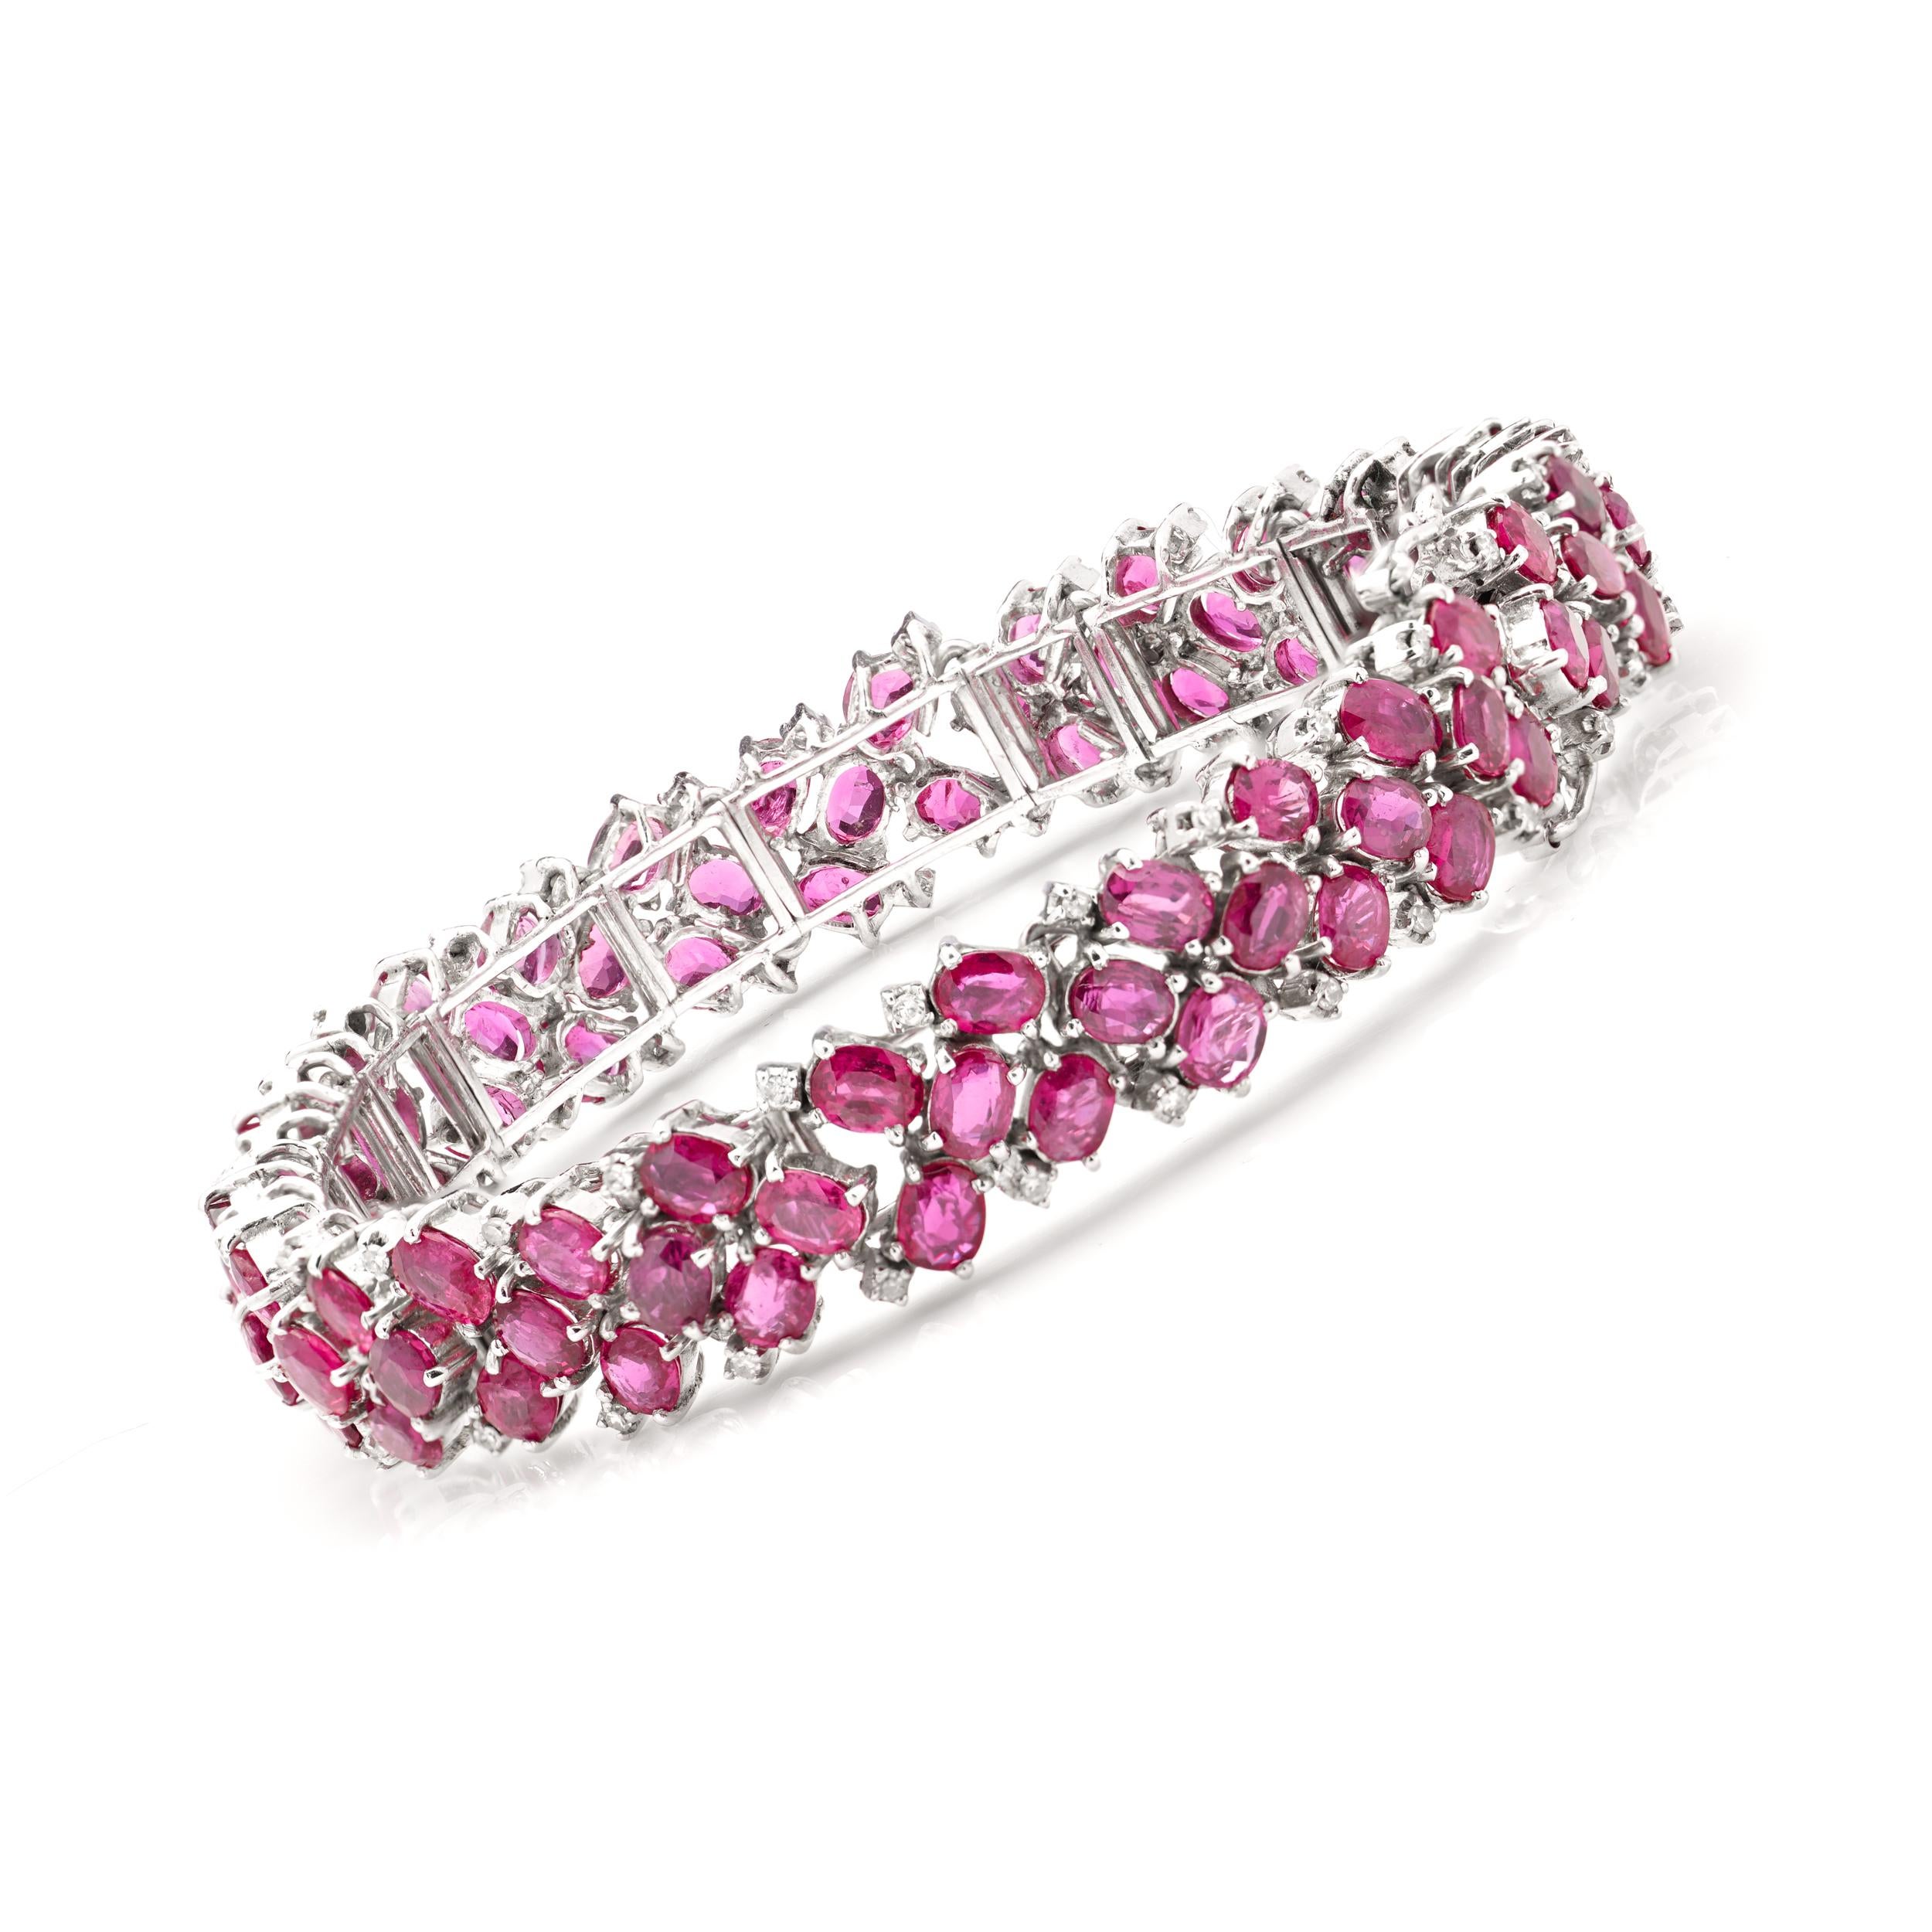 Women's 14kt. white gold link bracelet set with 22.5 carats of oval faceted rubies  For Sale